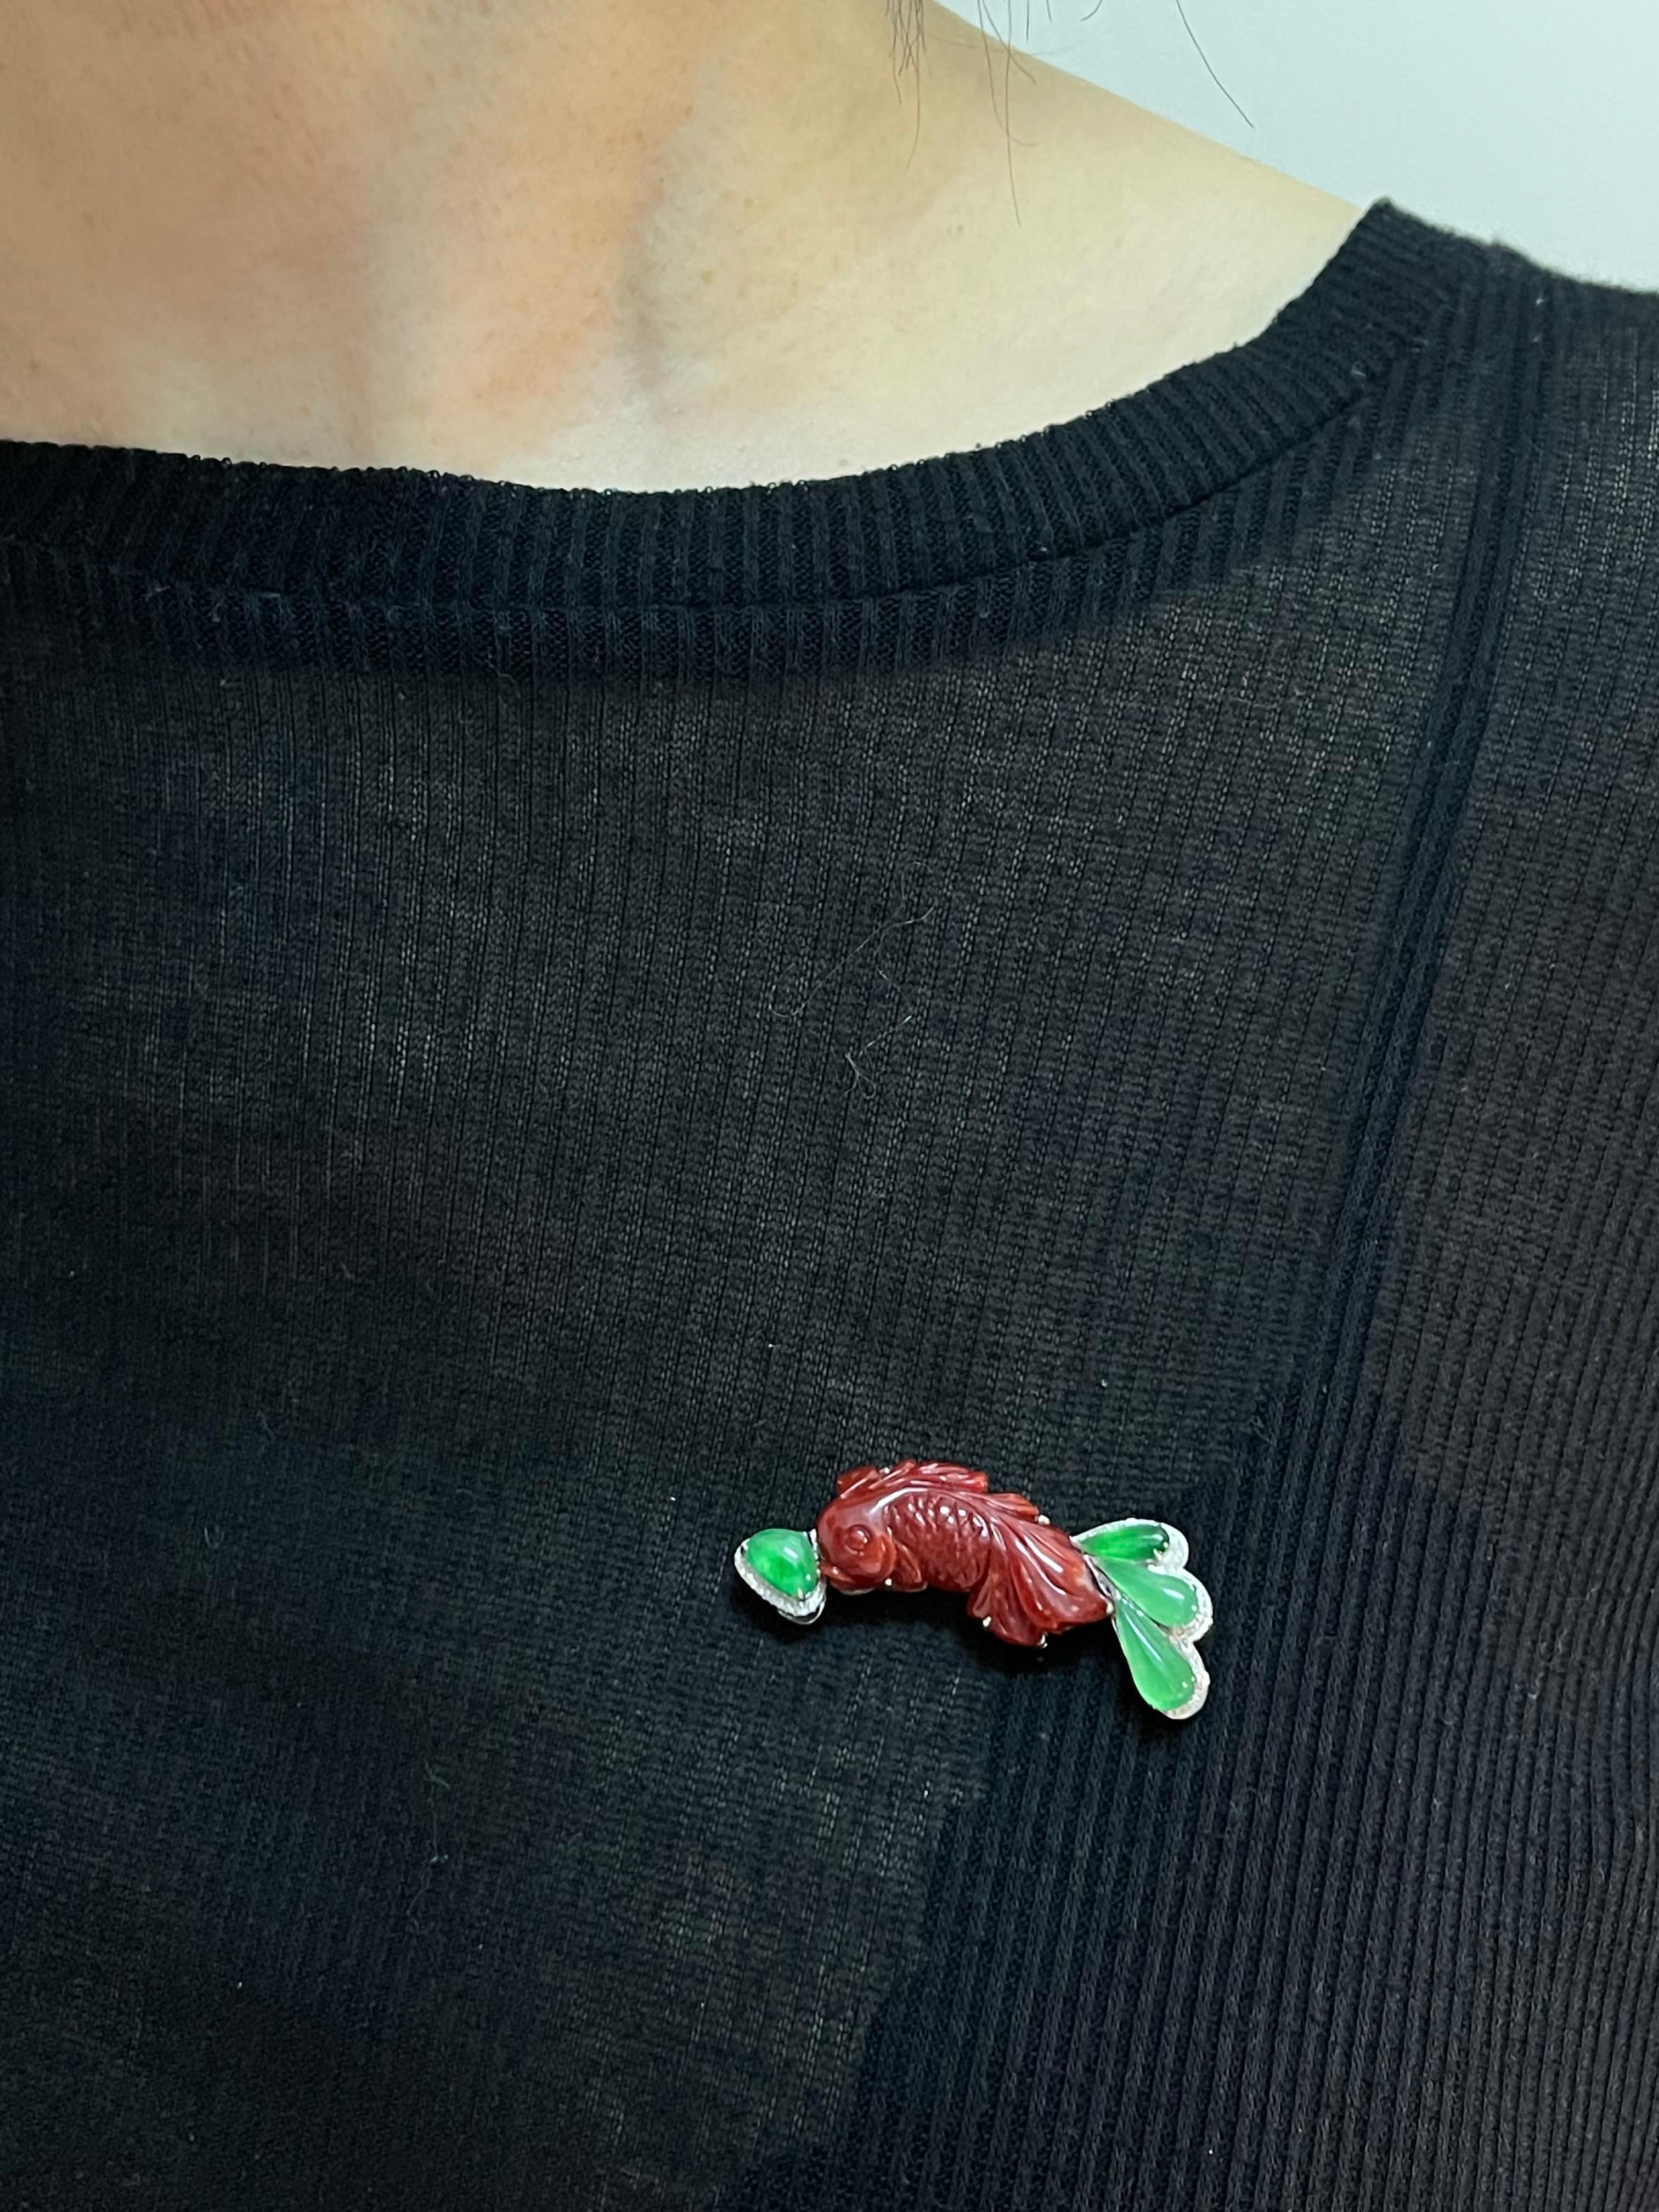 Please check out the HD video! This item can be used as a pendant or a brooch! This is a very well carved natural red coral Koi fish matched with glowing icy apple green jade and diamonds. There are 2 certificates, one for the natural red coral and